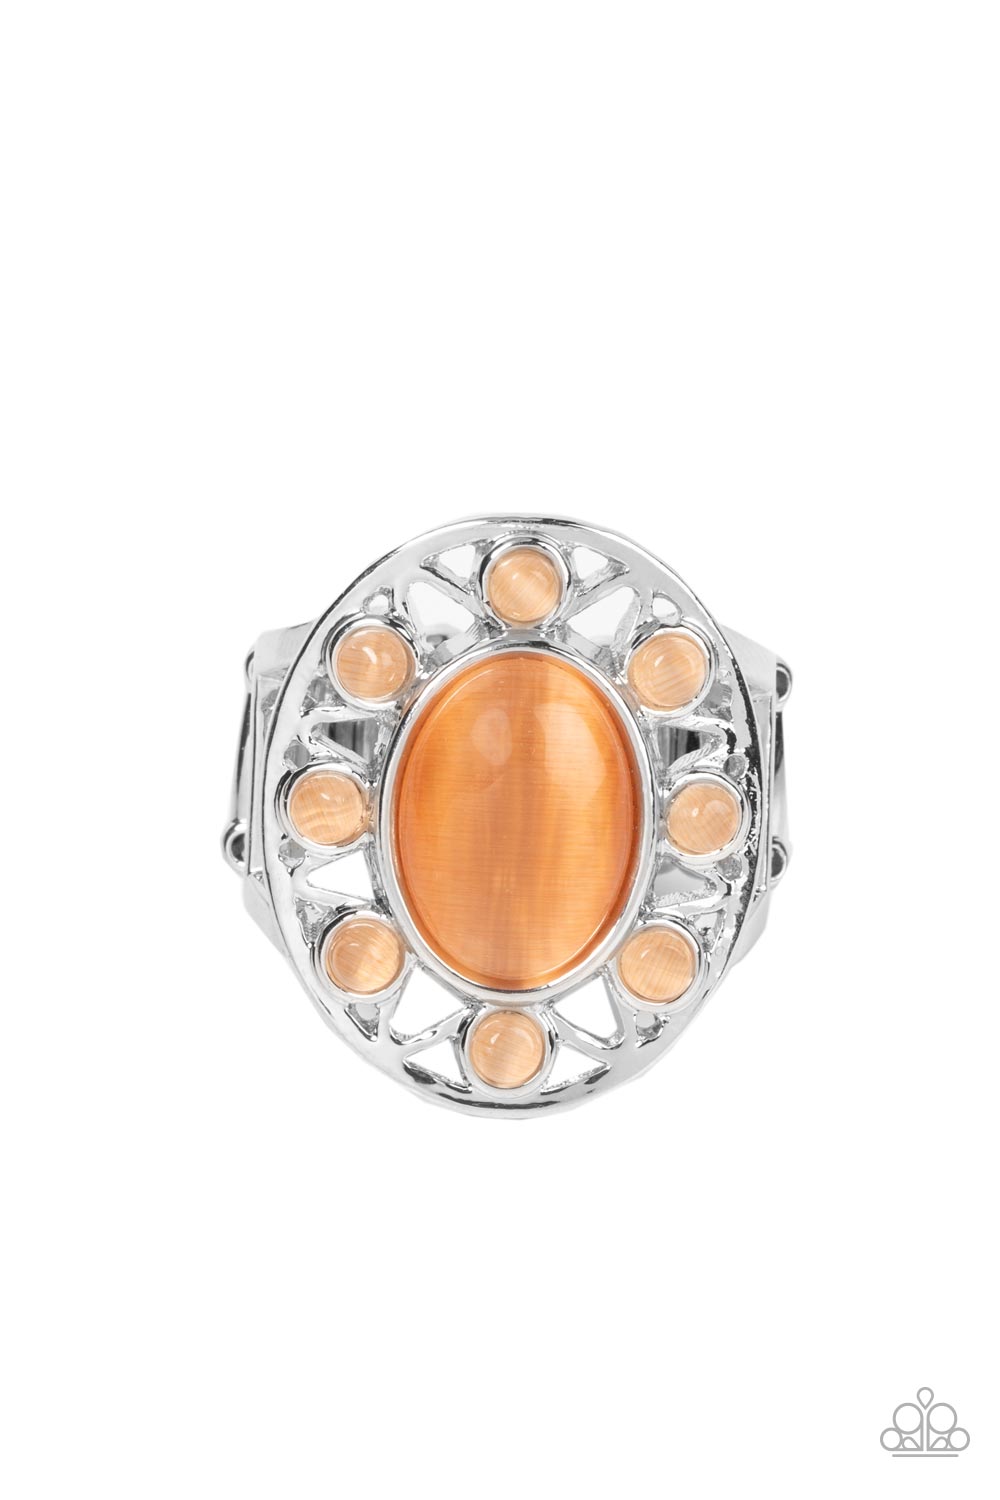 Sunny Solstice - Orange and Silver Ring - Paparazzi Accessories Bejeweled Accessories By Kristie